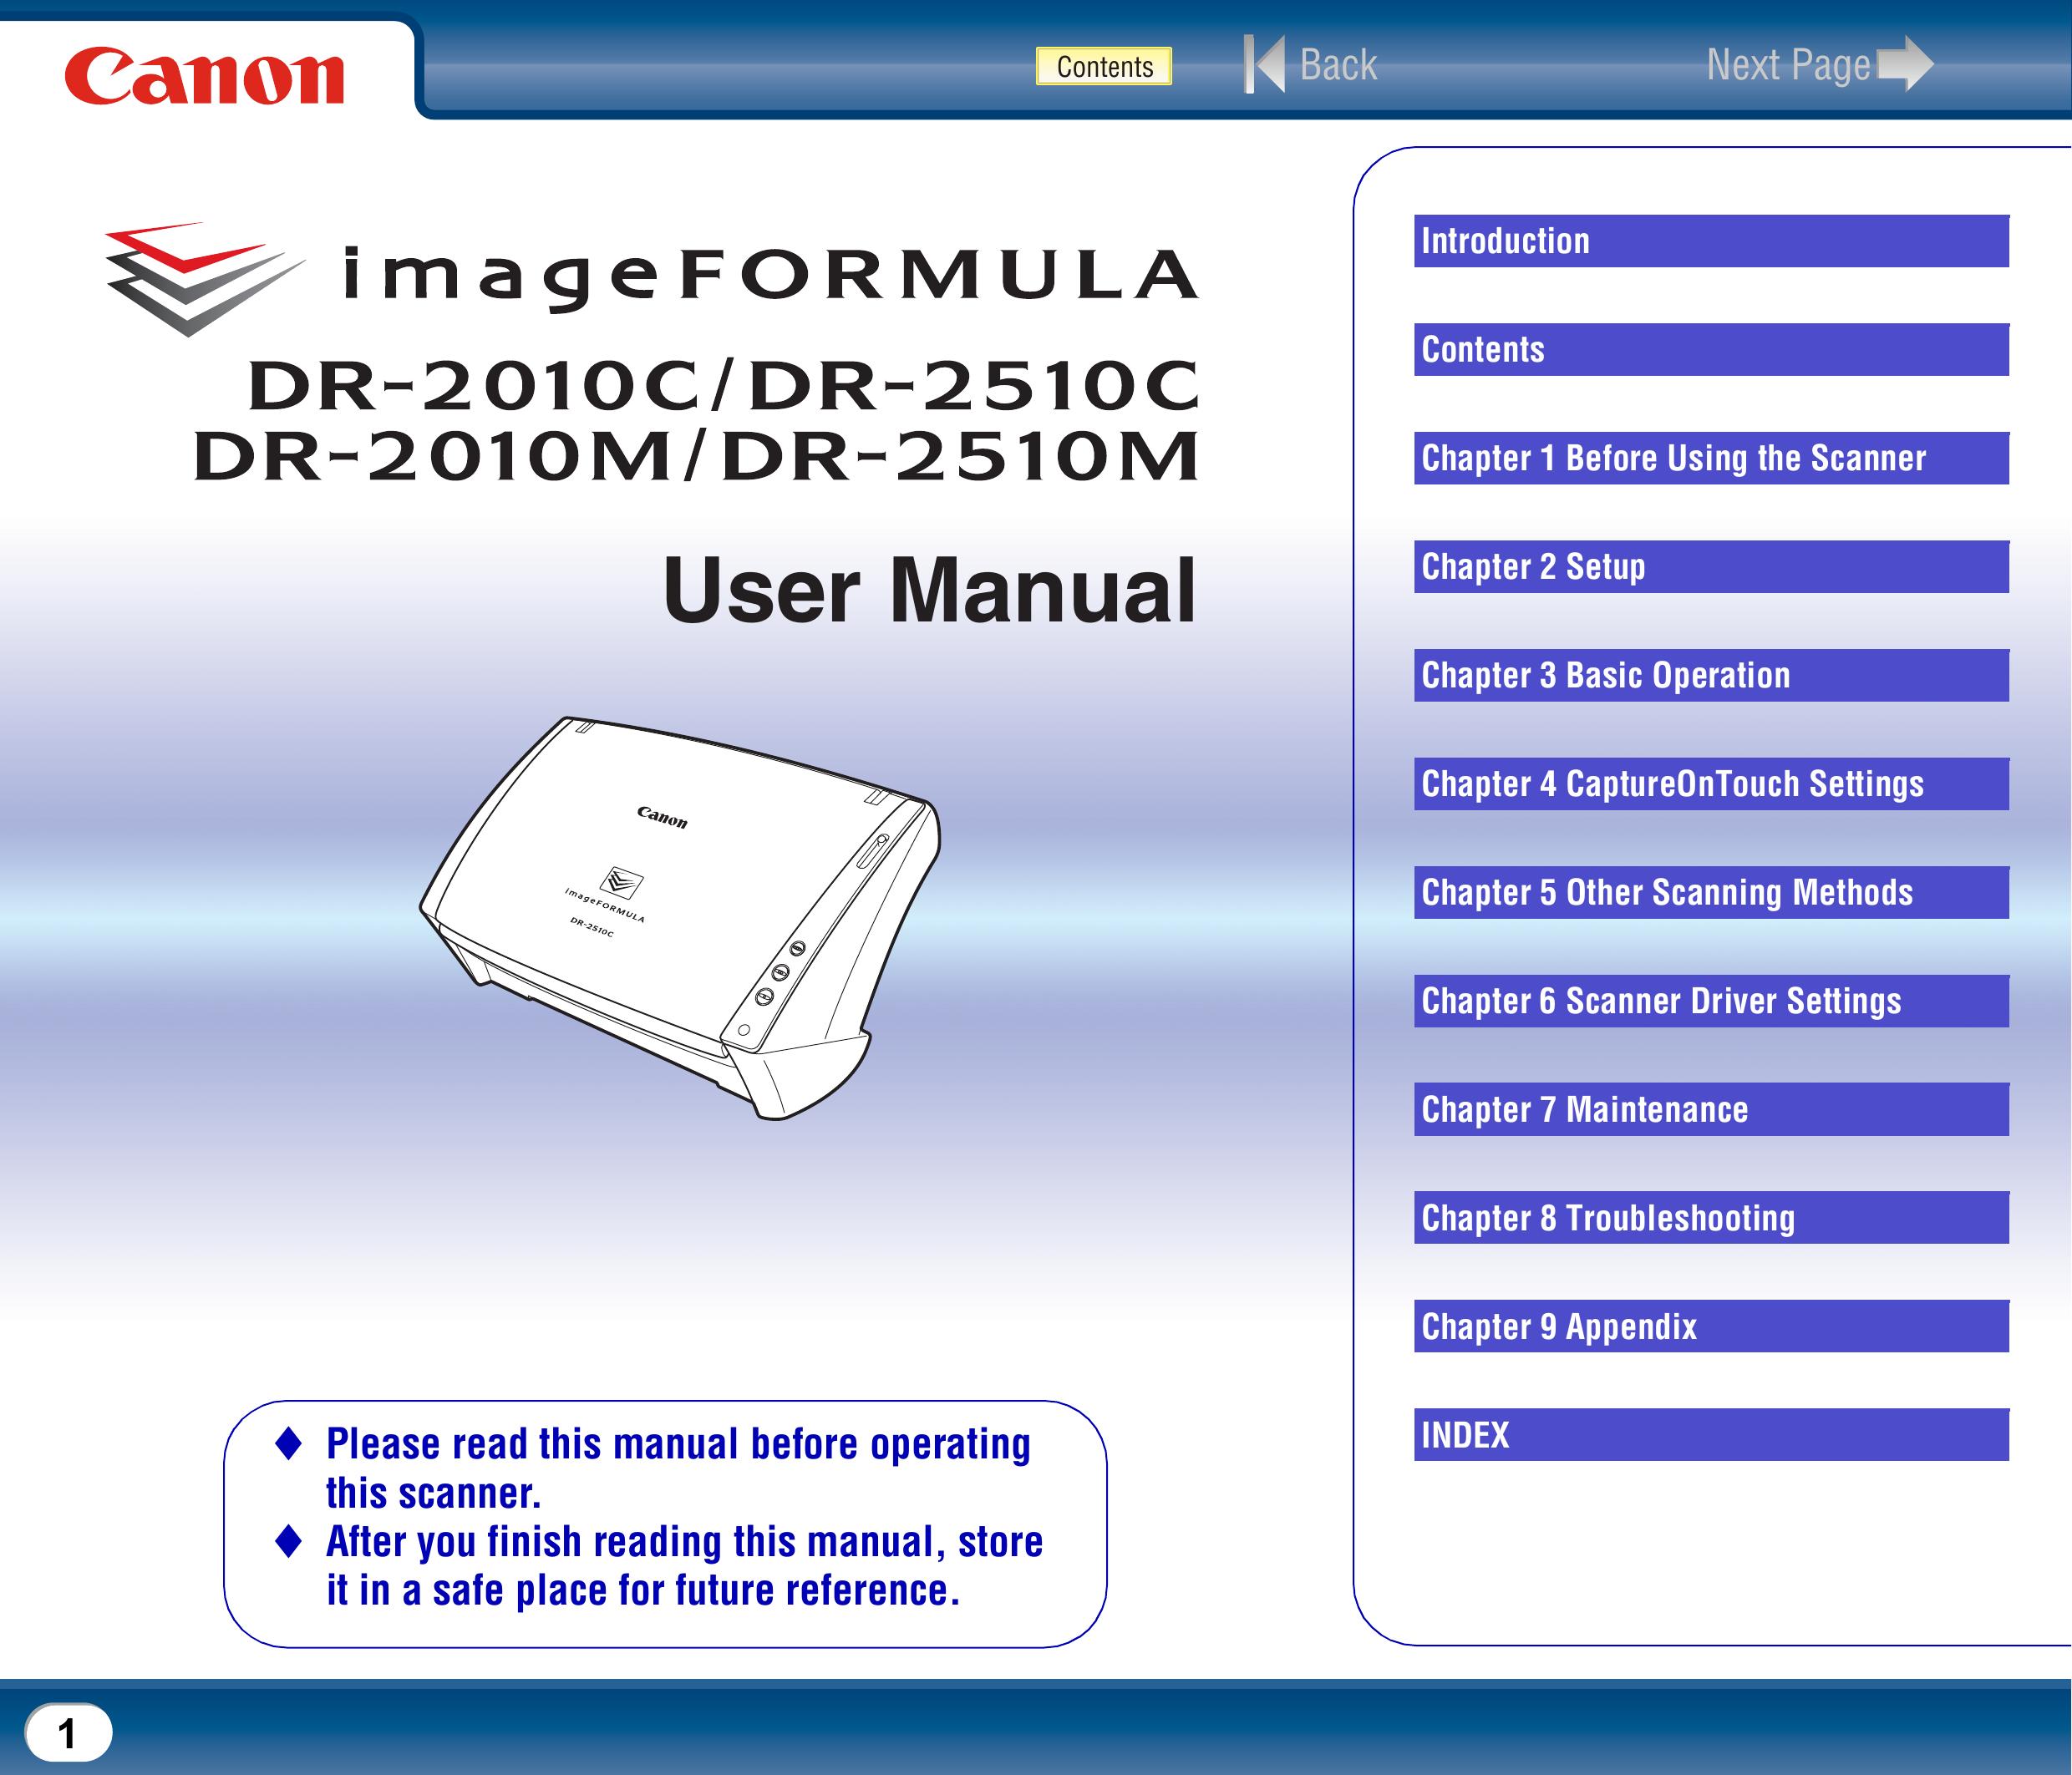 Canon DR-2010M Photo Scanner User Manual